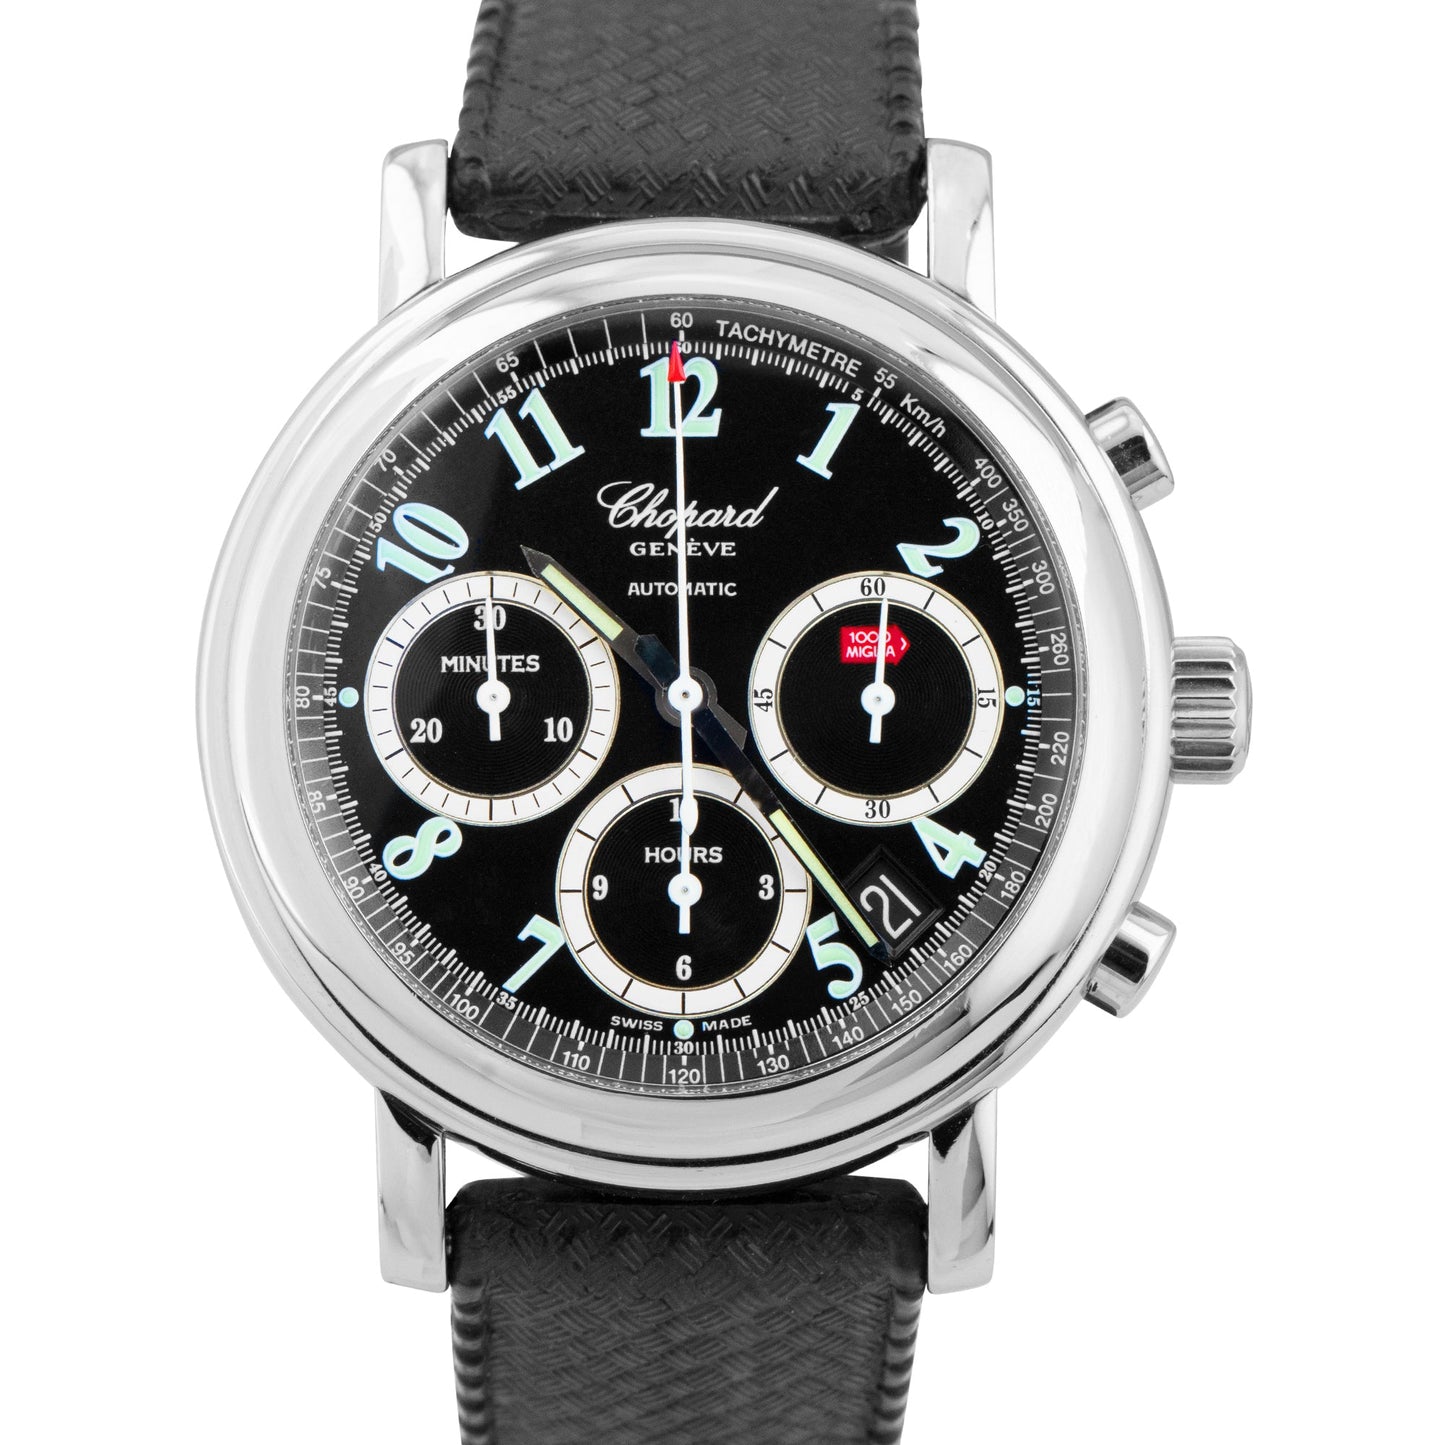 Chopard Mille Miglia Black Stainless Steel Chronograph 39mm Watch 8331 BOX